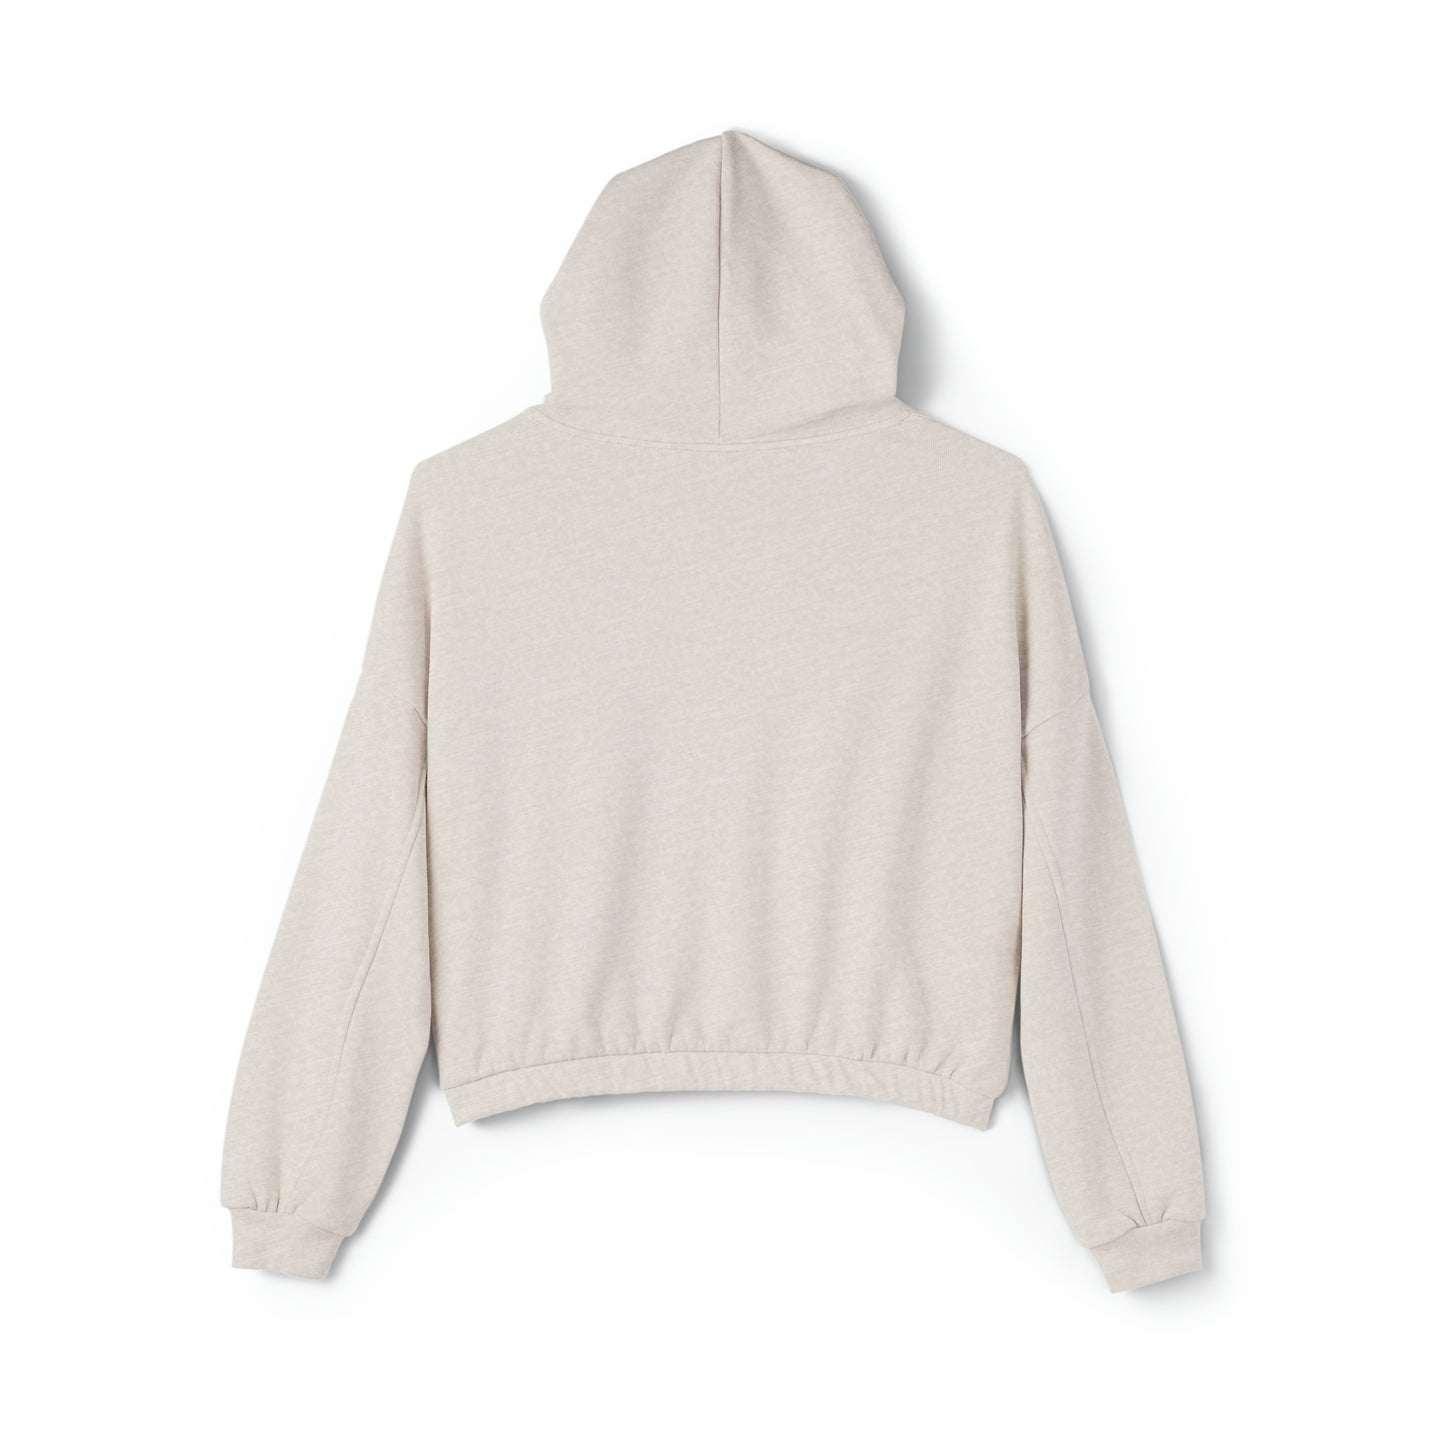 Catching Snow- Cinched Bottom Hoodie